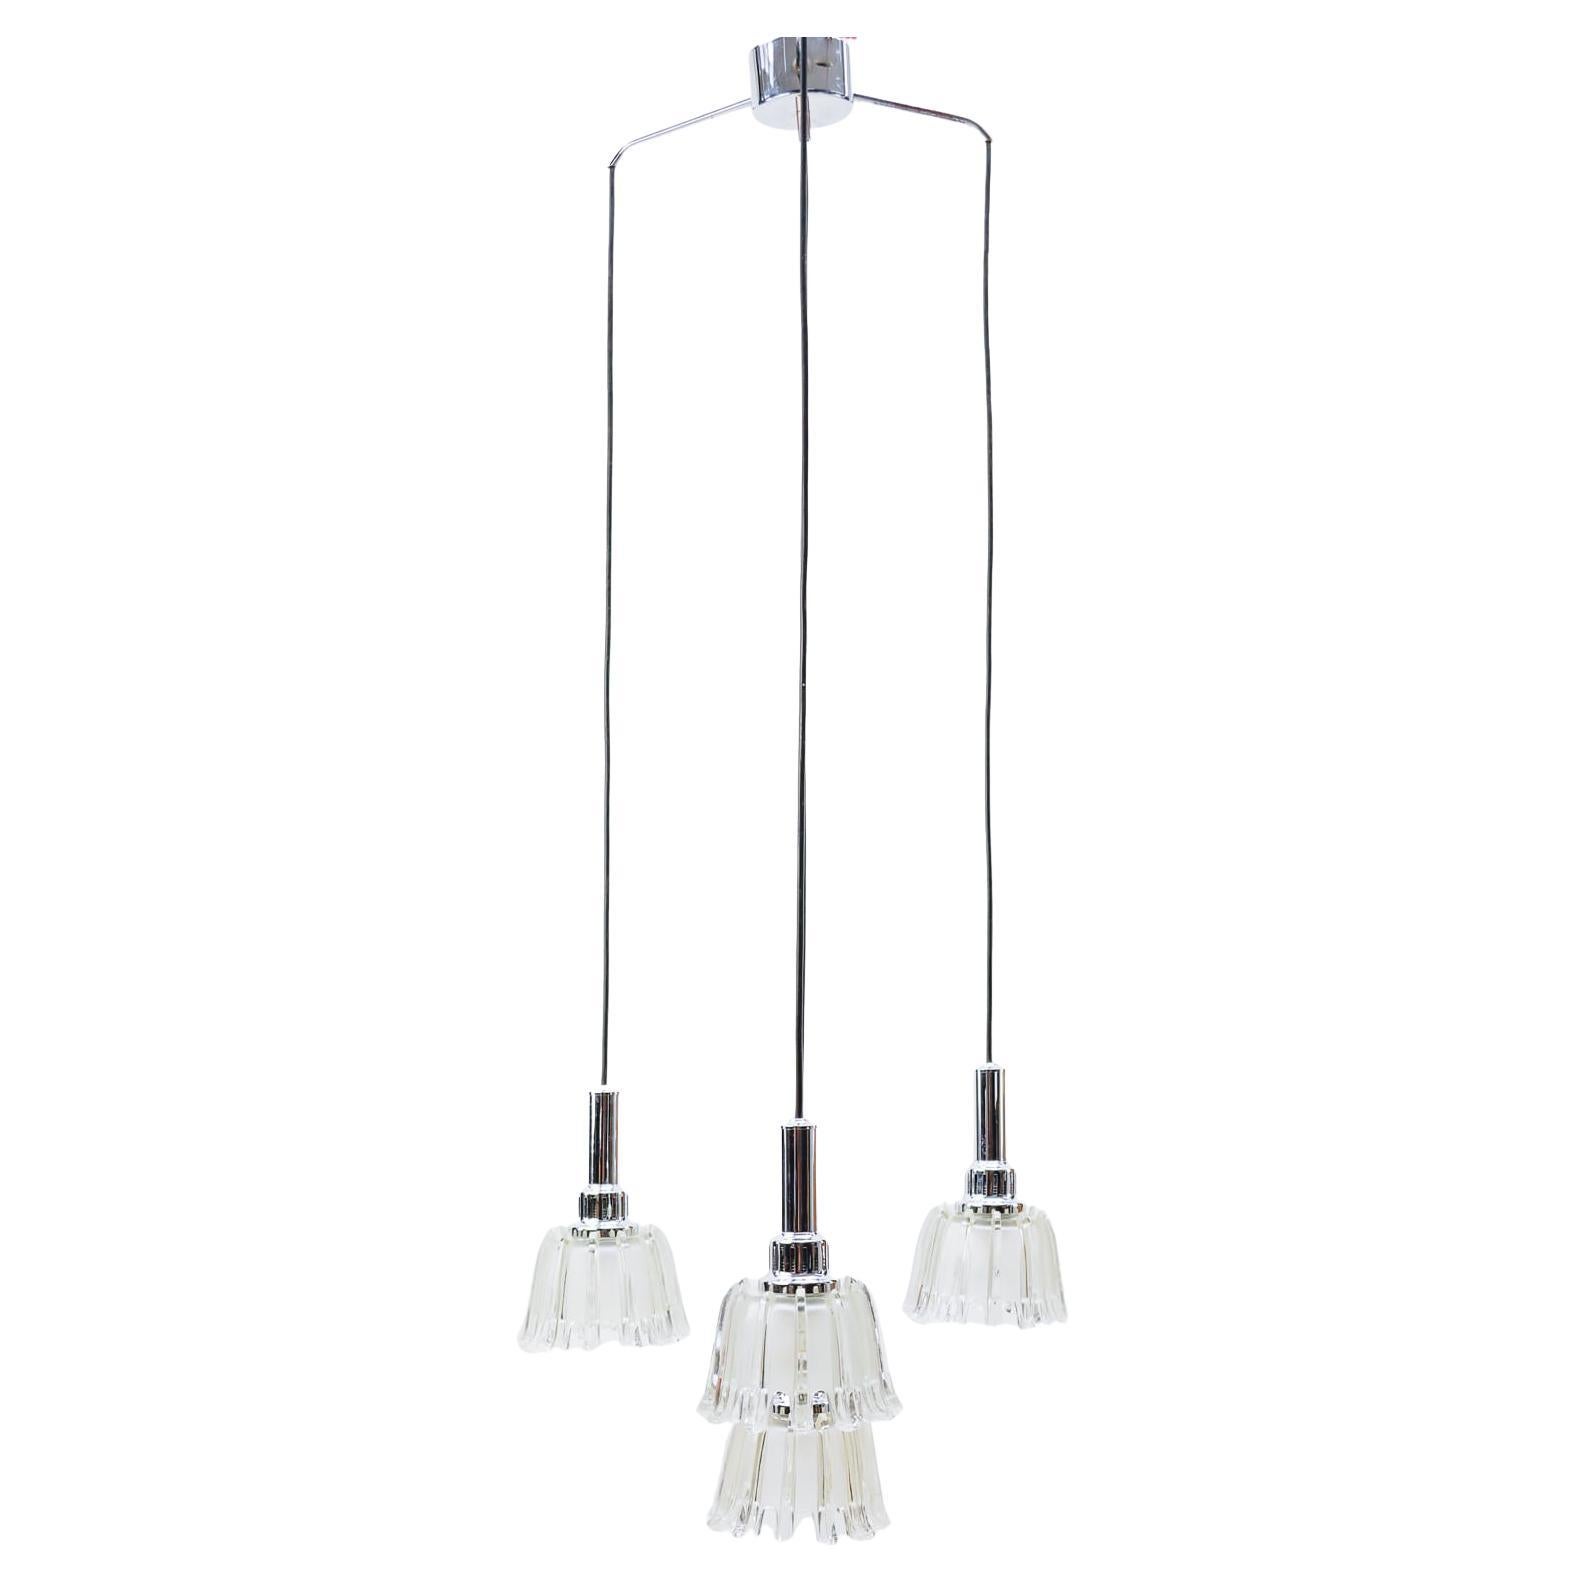 This ceiling lamp features a small frame with four cascading glass elements.

Fully functional. 

Four E27 sockets. Works with 220V and 110V.

Wiring is suitable for all countries.